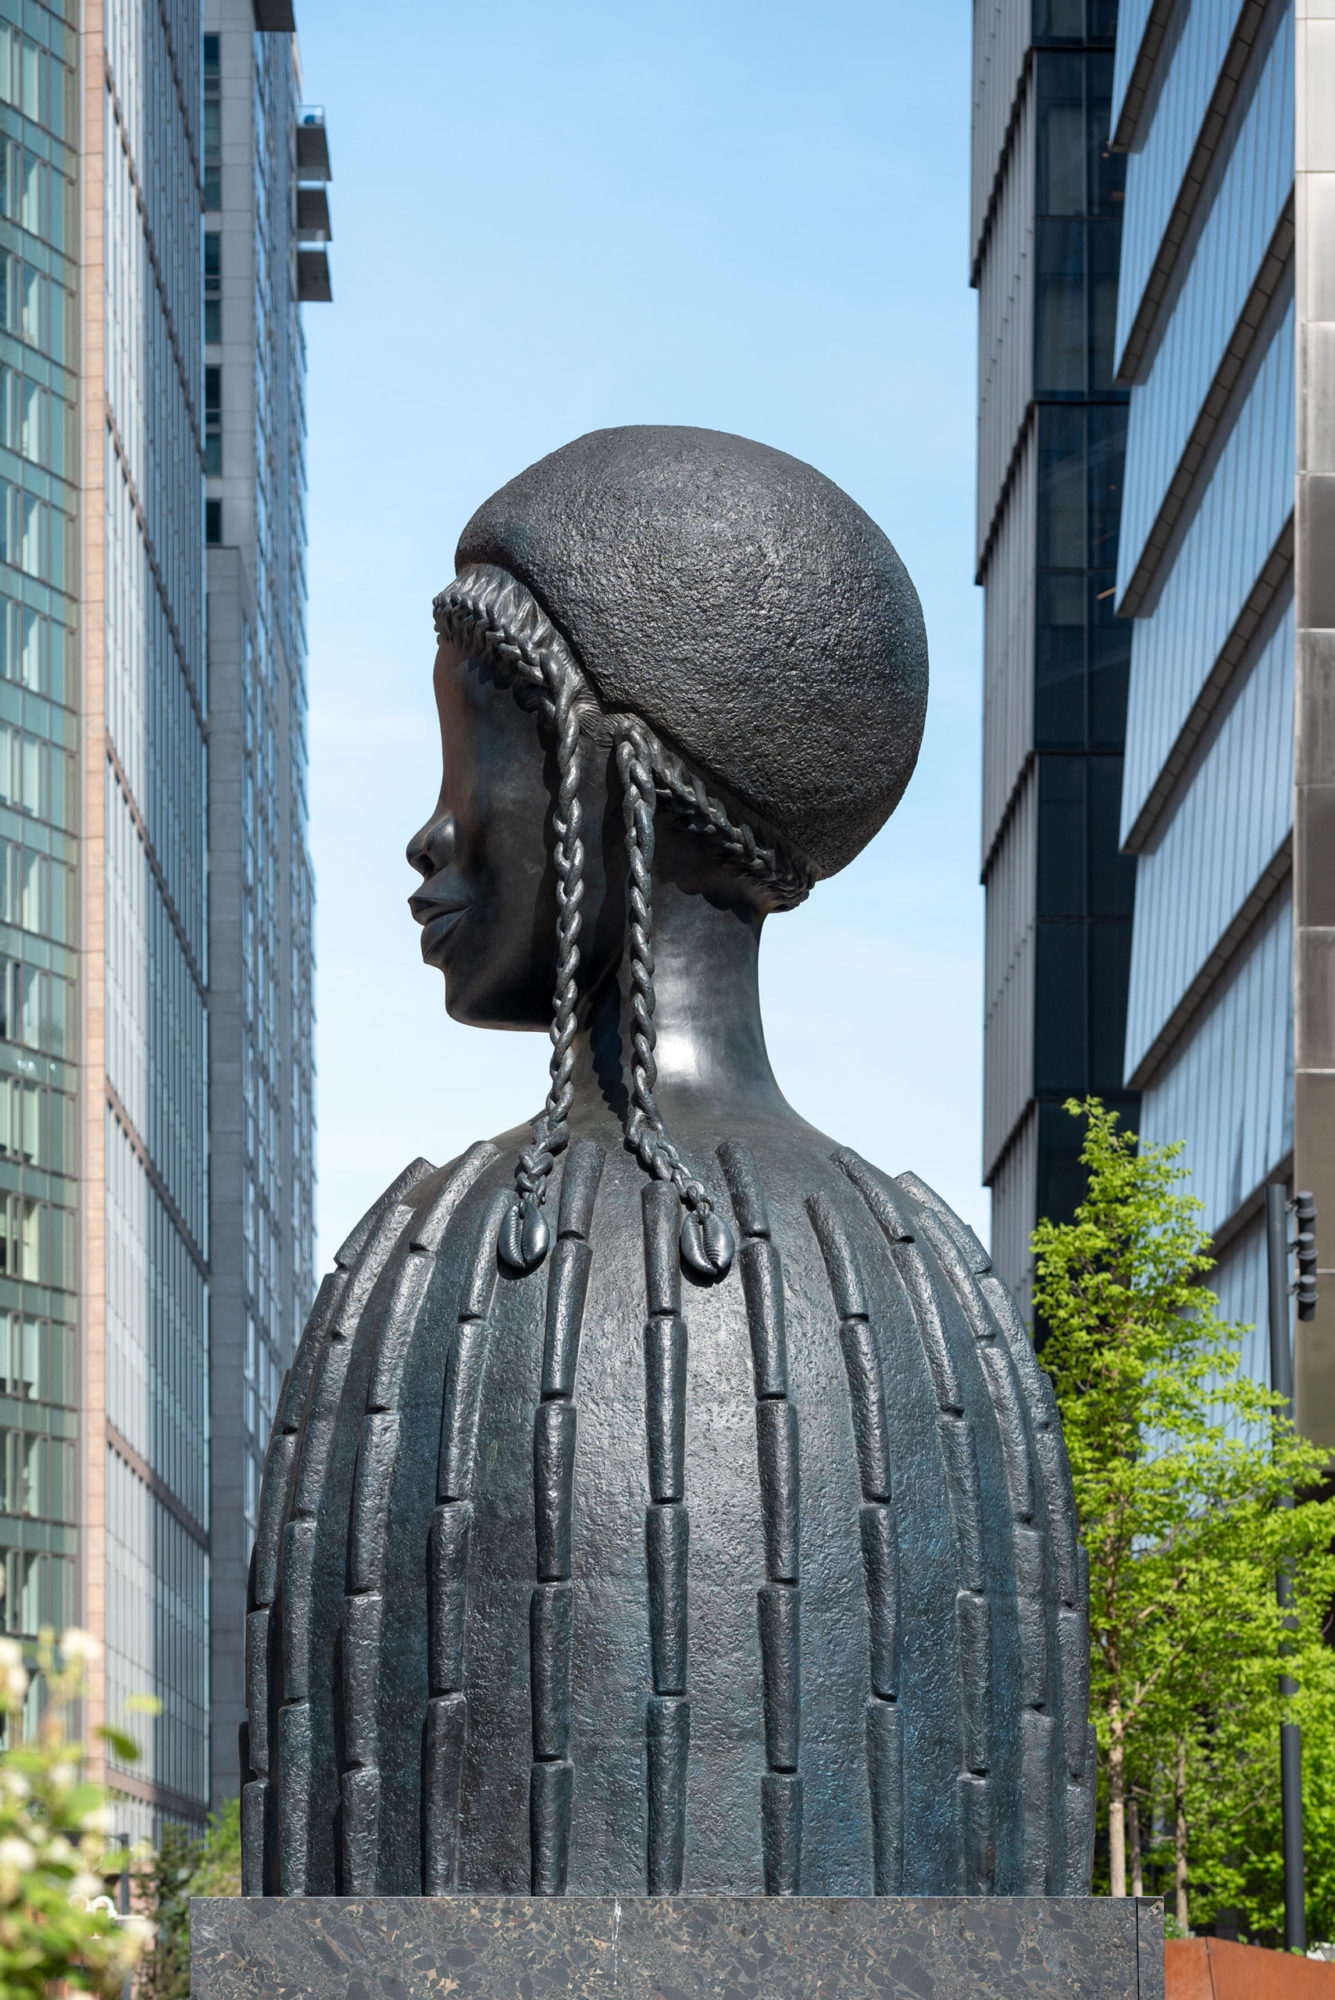 A large black sculpture of the head and torso of a figure. The figure has one singular braid wrapped around the edges of the head, and the rest of the hair styled in a small afro. The braids end with cowry shells. The sculpture is in between two rows of buildings.